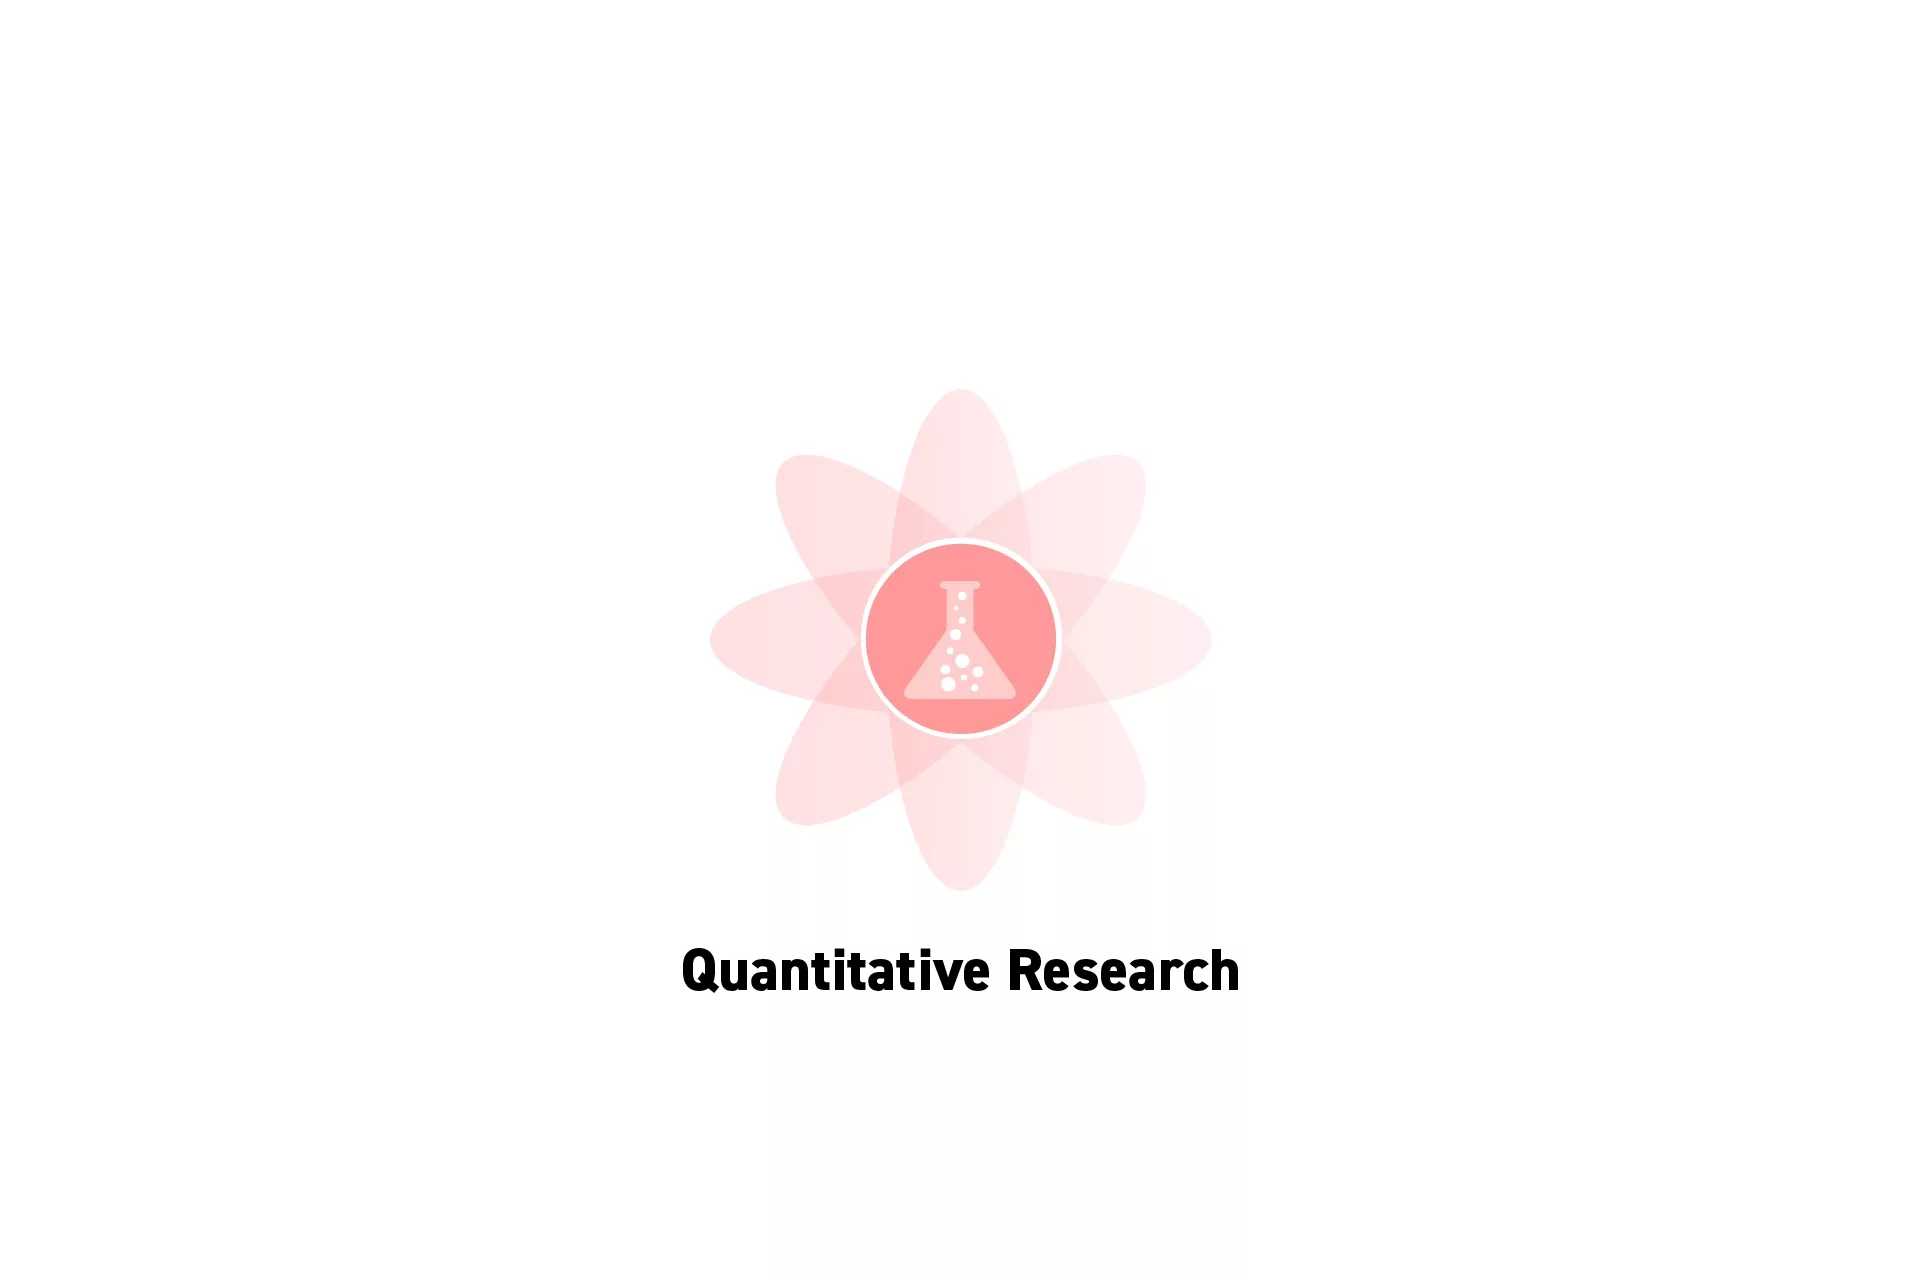 A flower that represents Strategy with the text "Quantitative Research" beneath it.